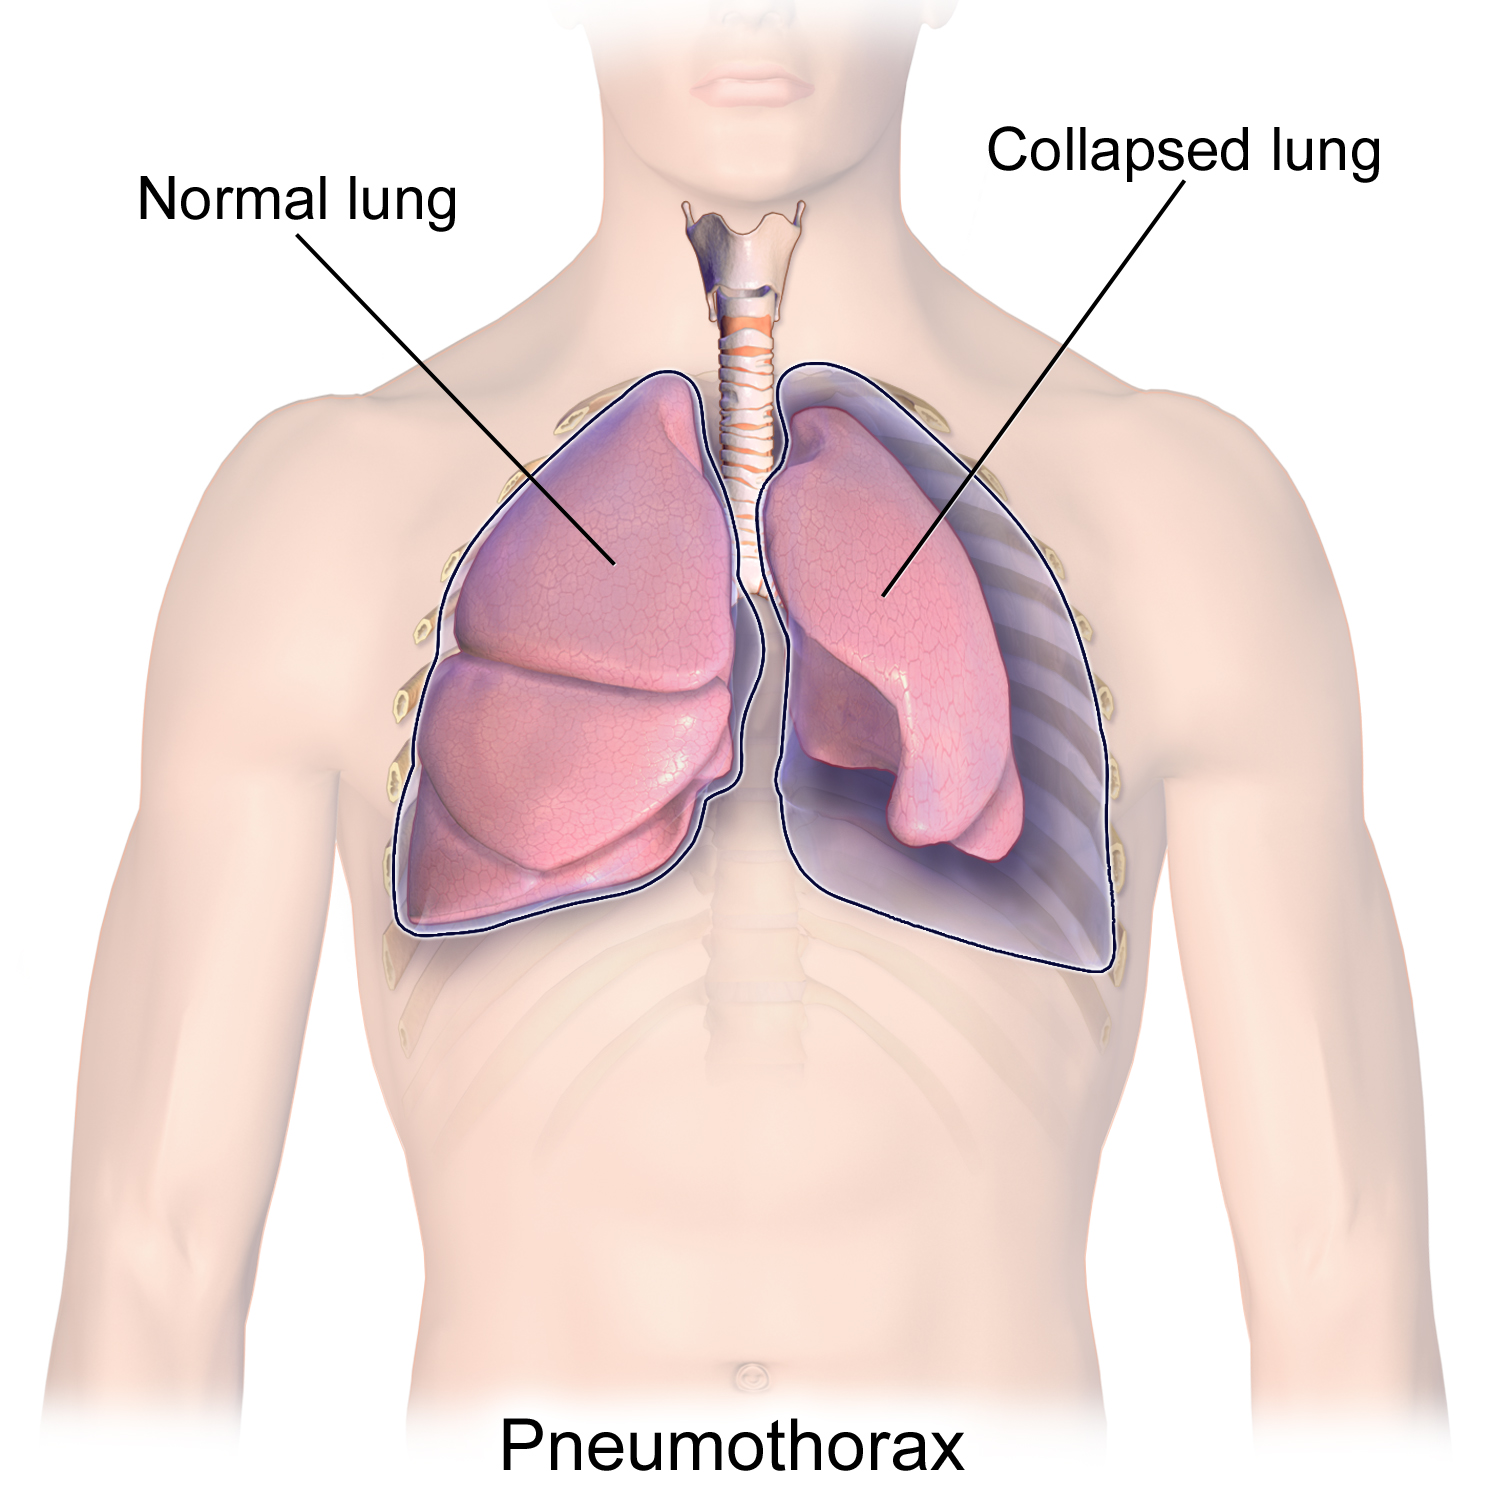 Pneumothorax on the left, as indicated by air in the pleural cavity and collapse of the left lung.